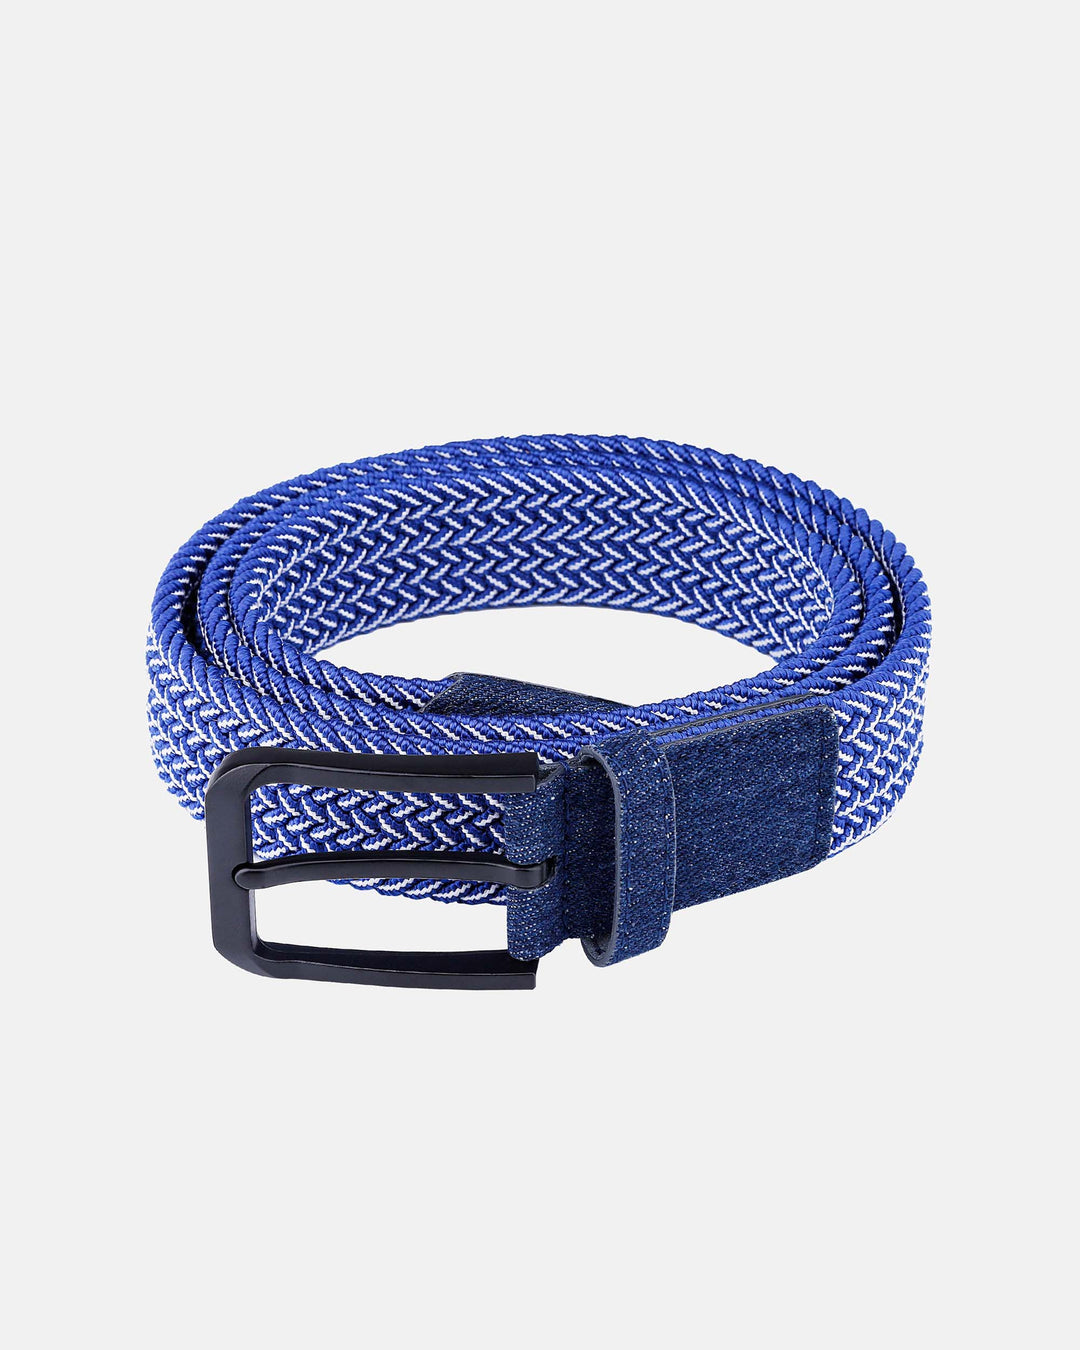 Blue/White Belt with Black Buckle and Blue Denim tail